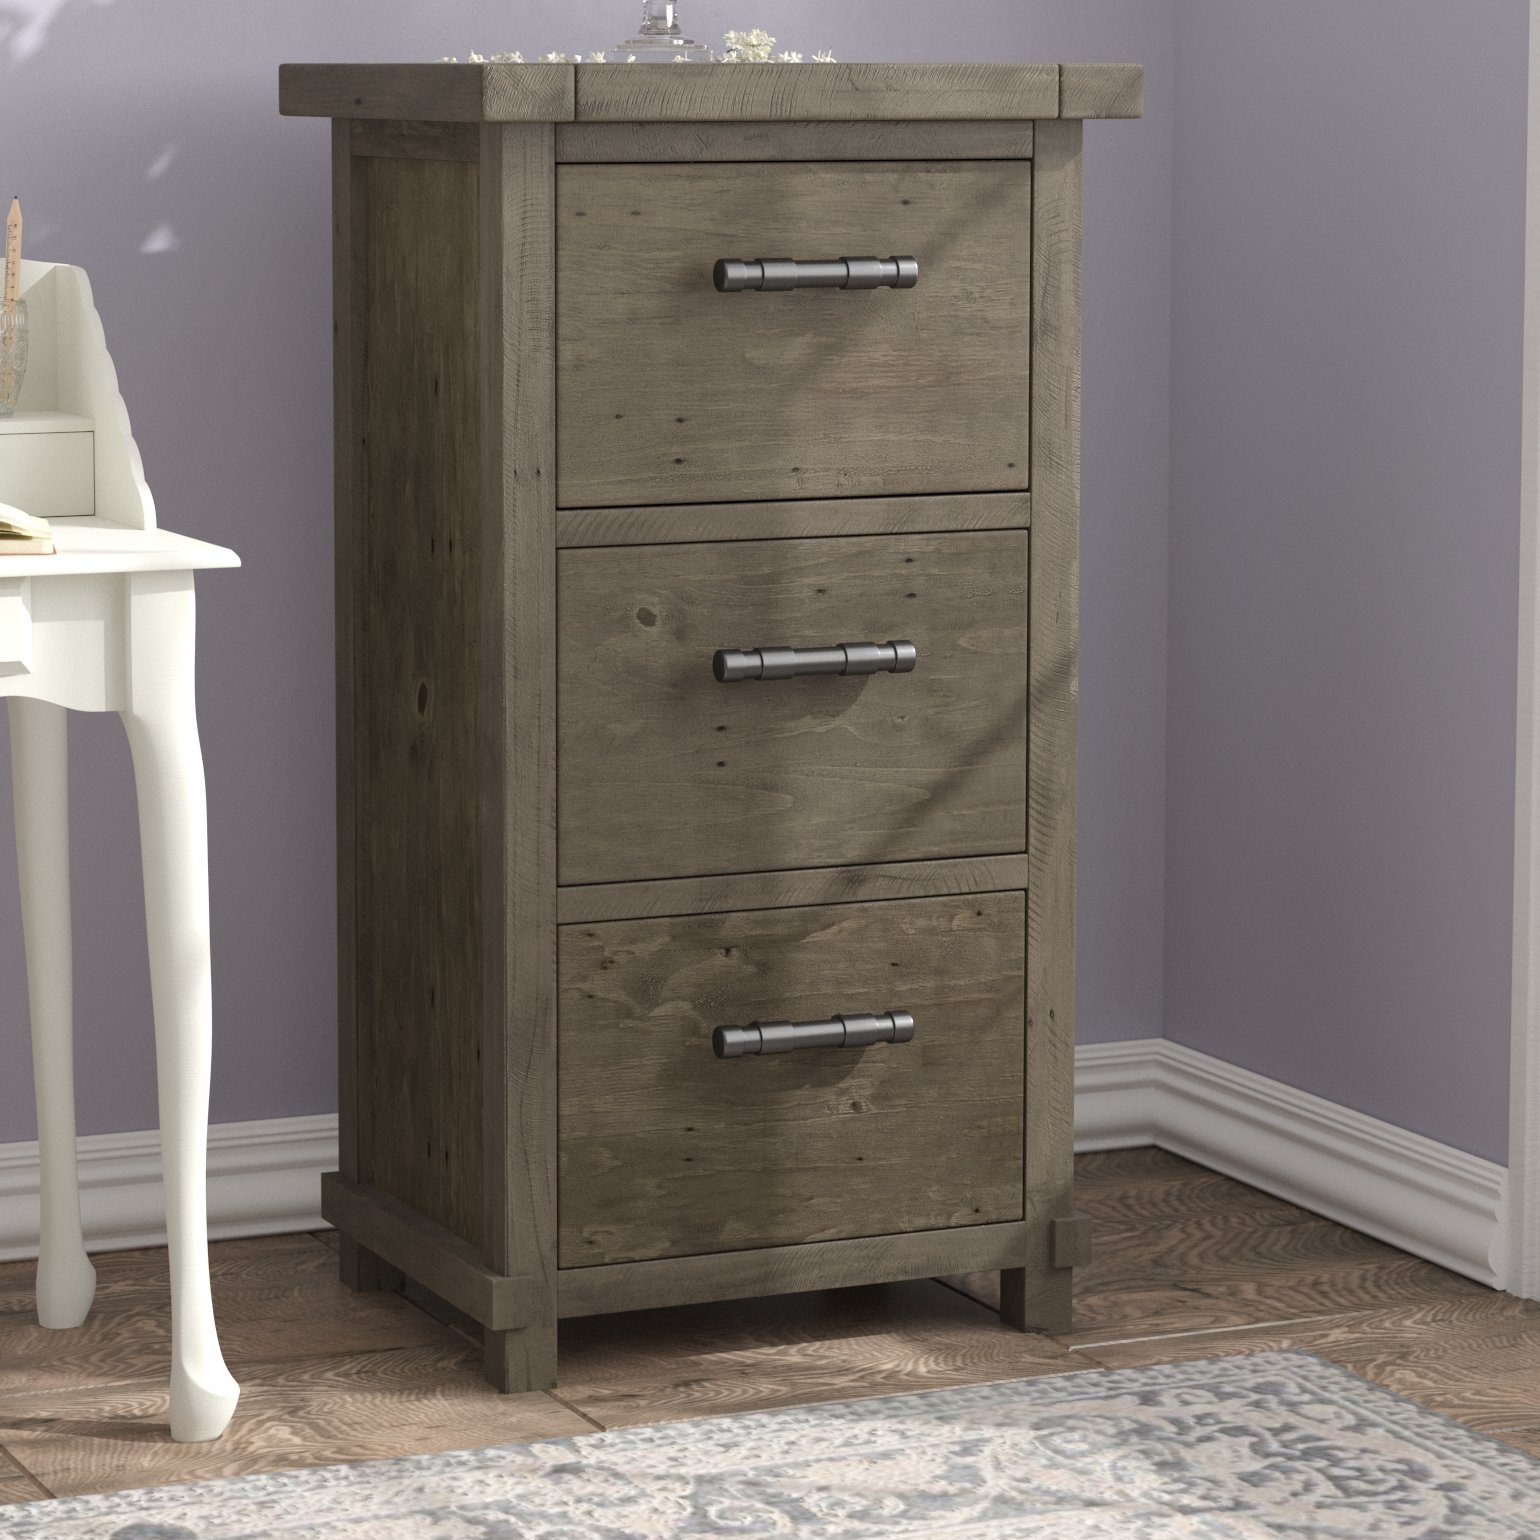 Lark Manor Gertrude 3 Drawer Vertical Filing Cabinet Reviews Wayfair within proportions 1540 X 1540